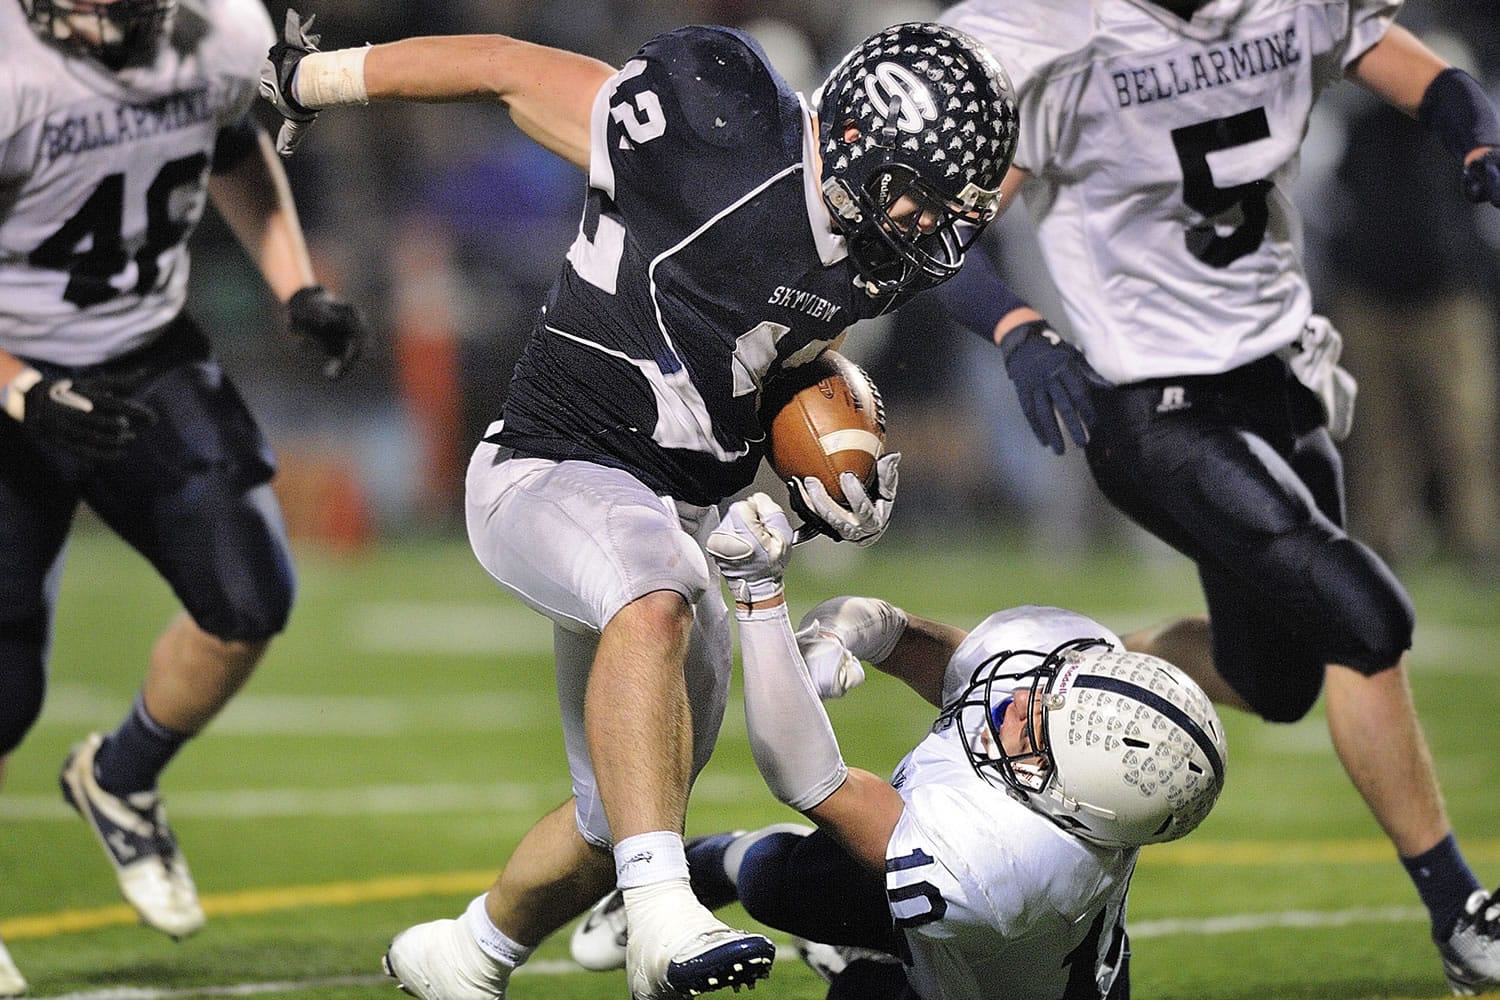 Skyview's Parker Henry runs over Drew Griffin of Bellarmine Prep to pick up a first down during the second half Saturday.